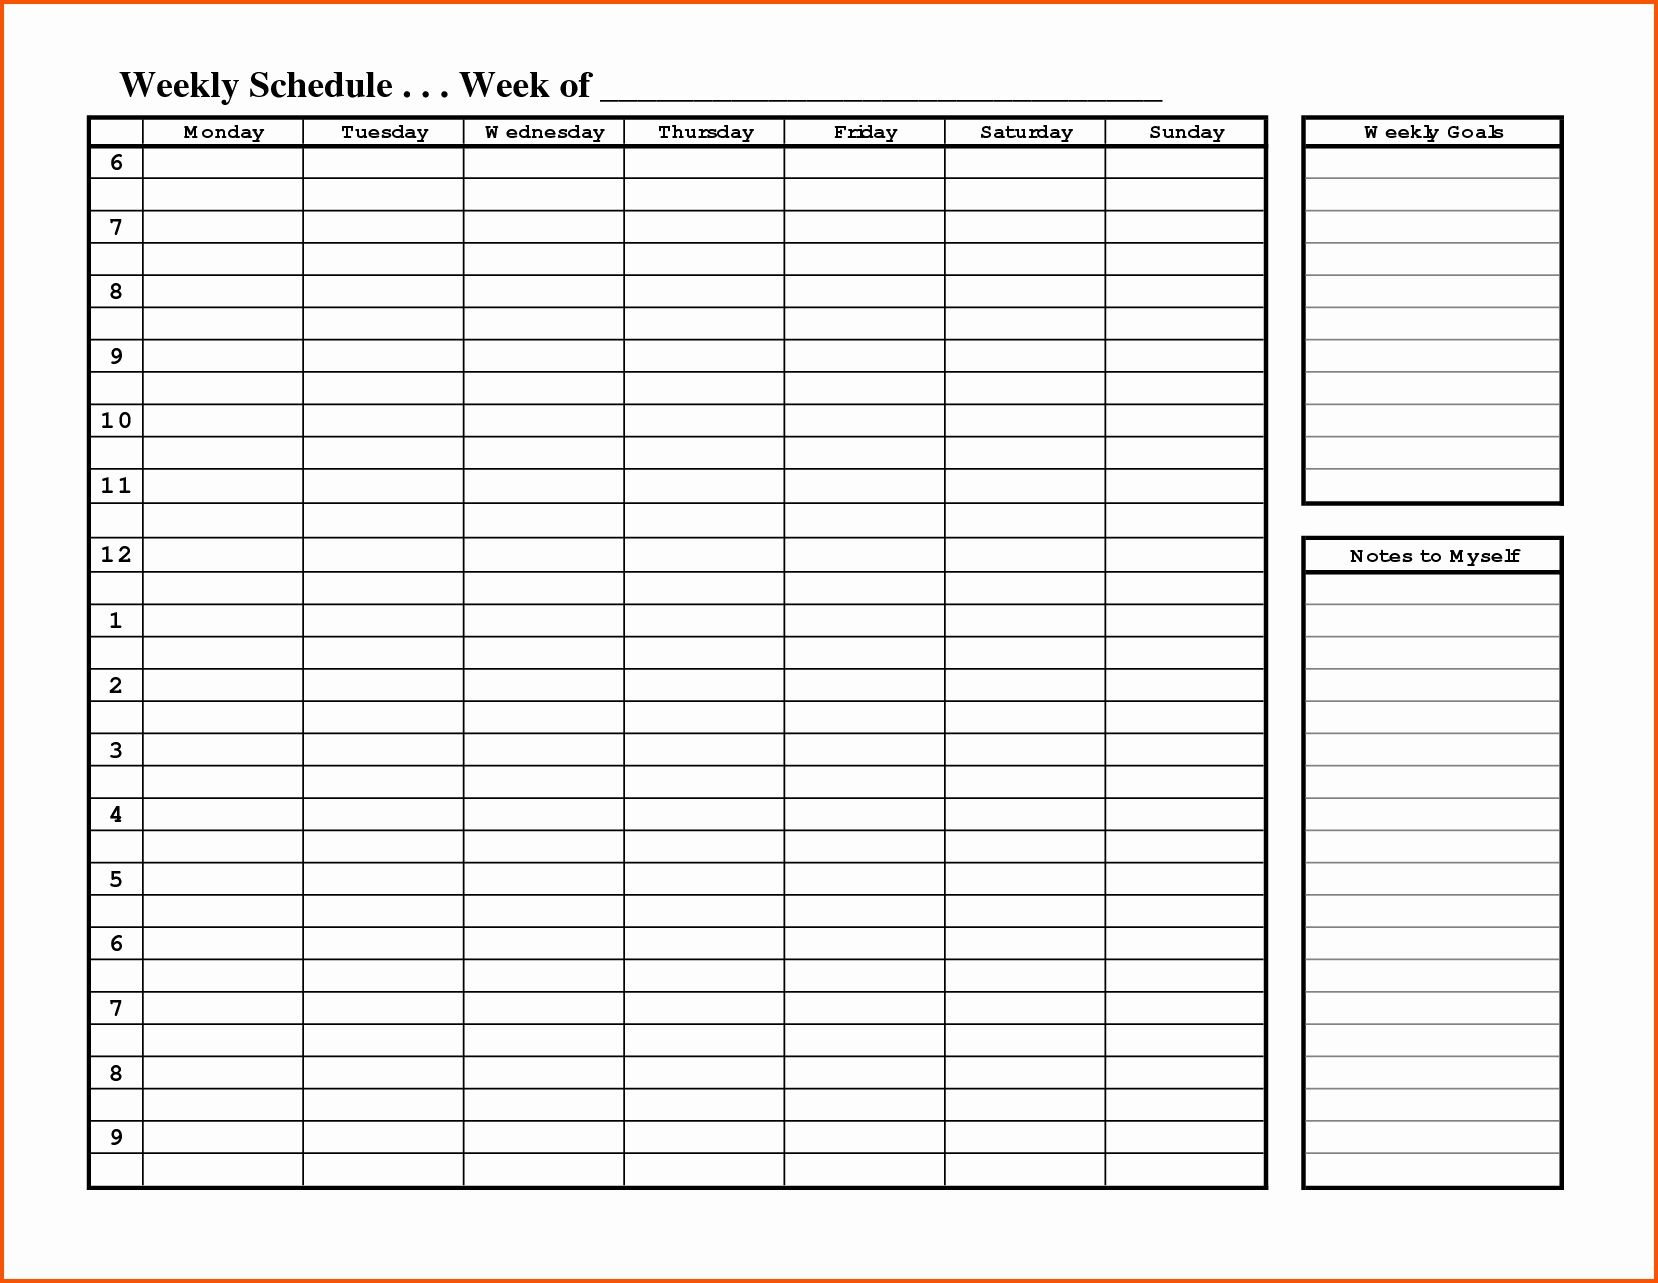 Weekly Hourly Planner Template Word | Daily Calendar within Hourly Weekly Calendar